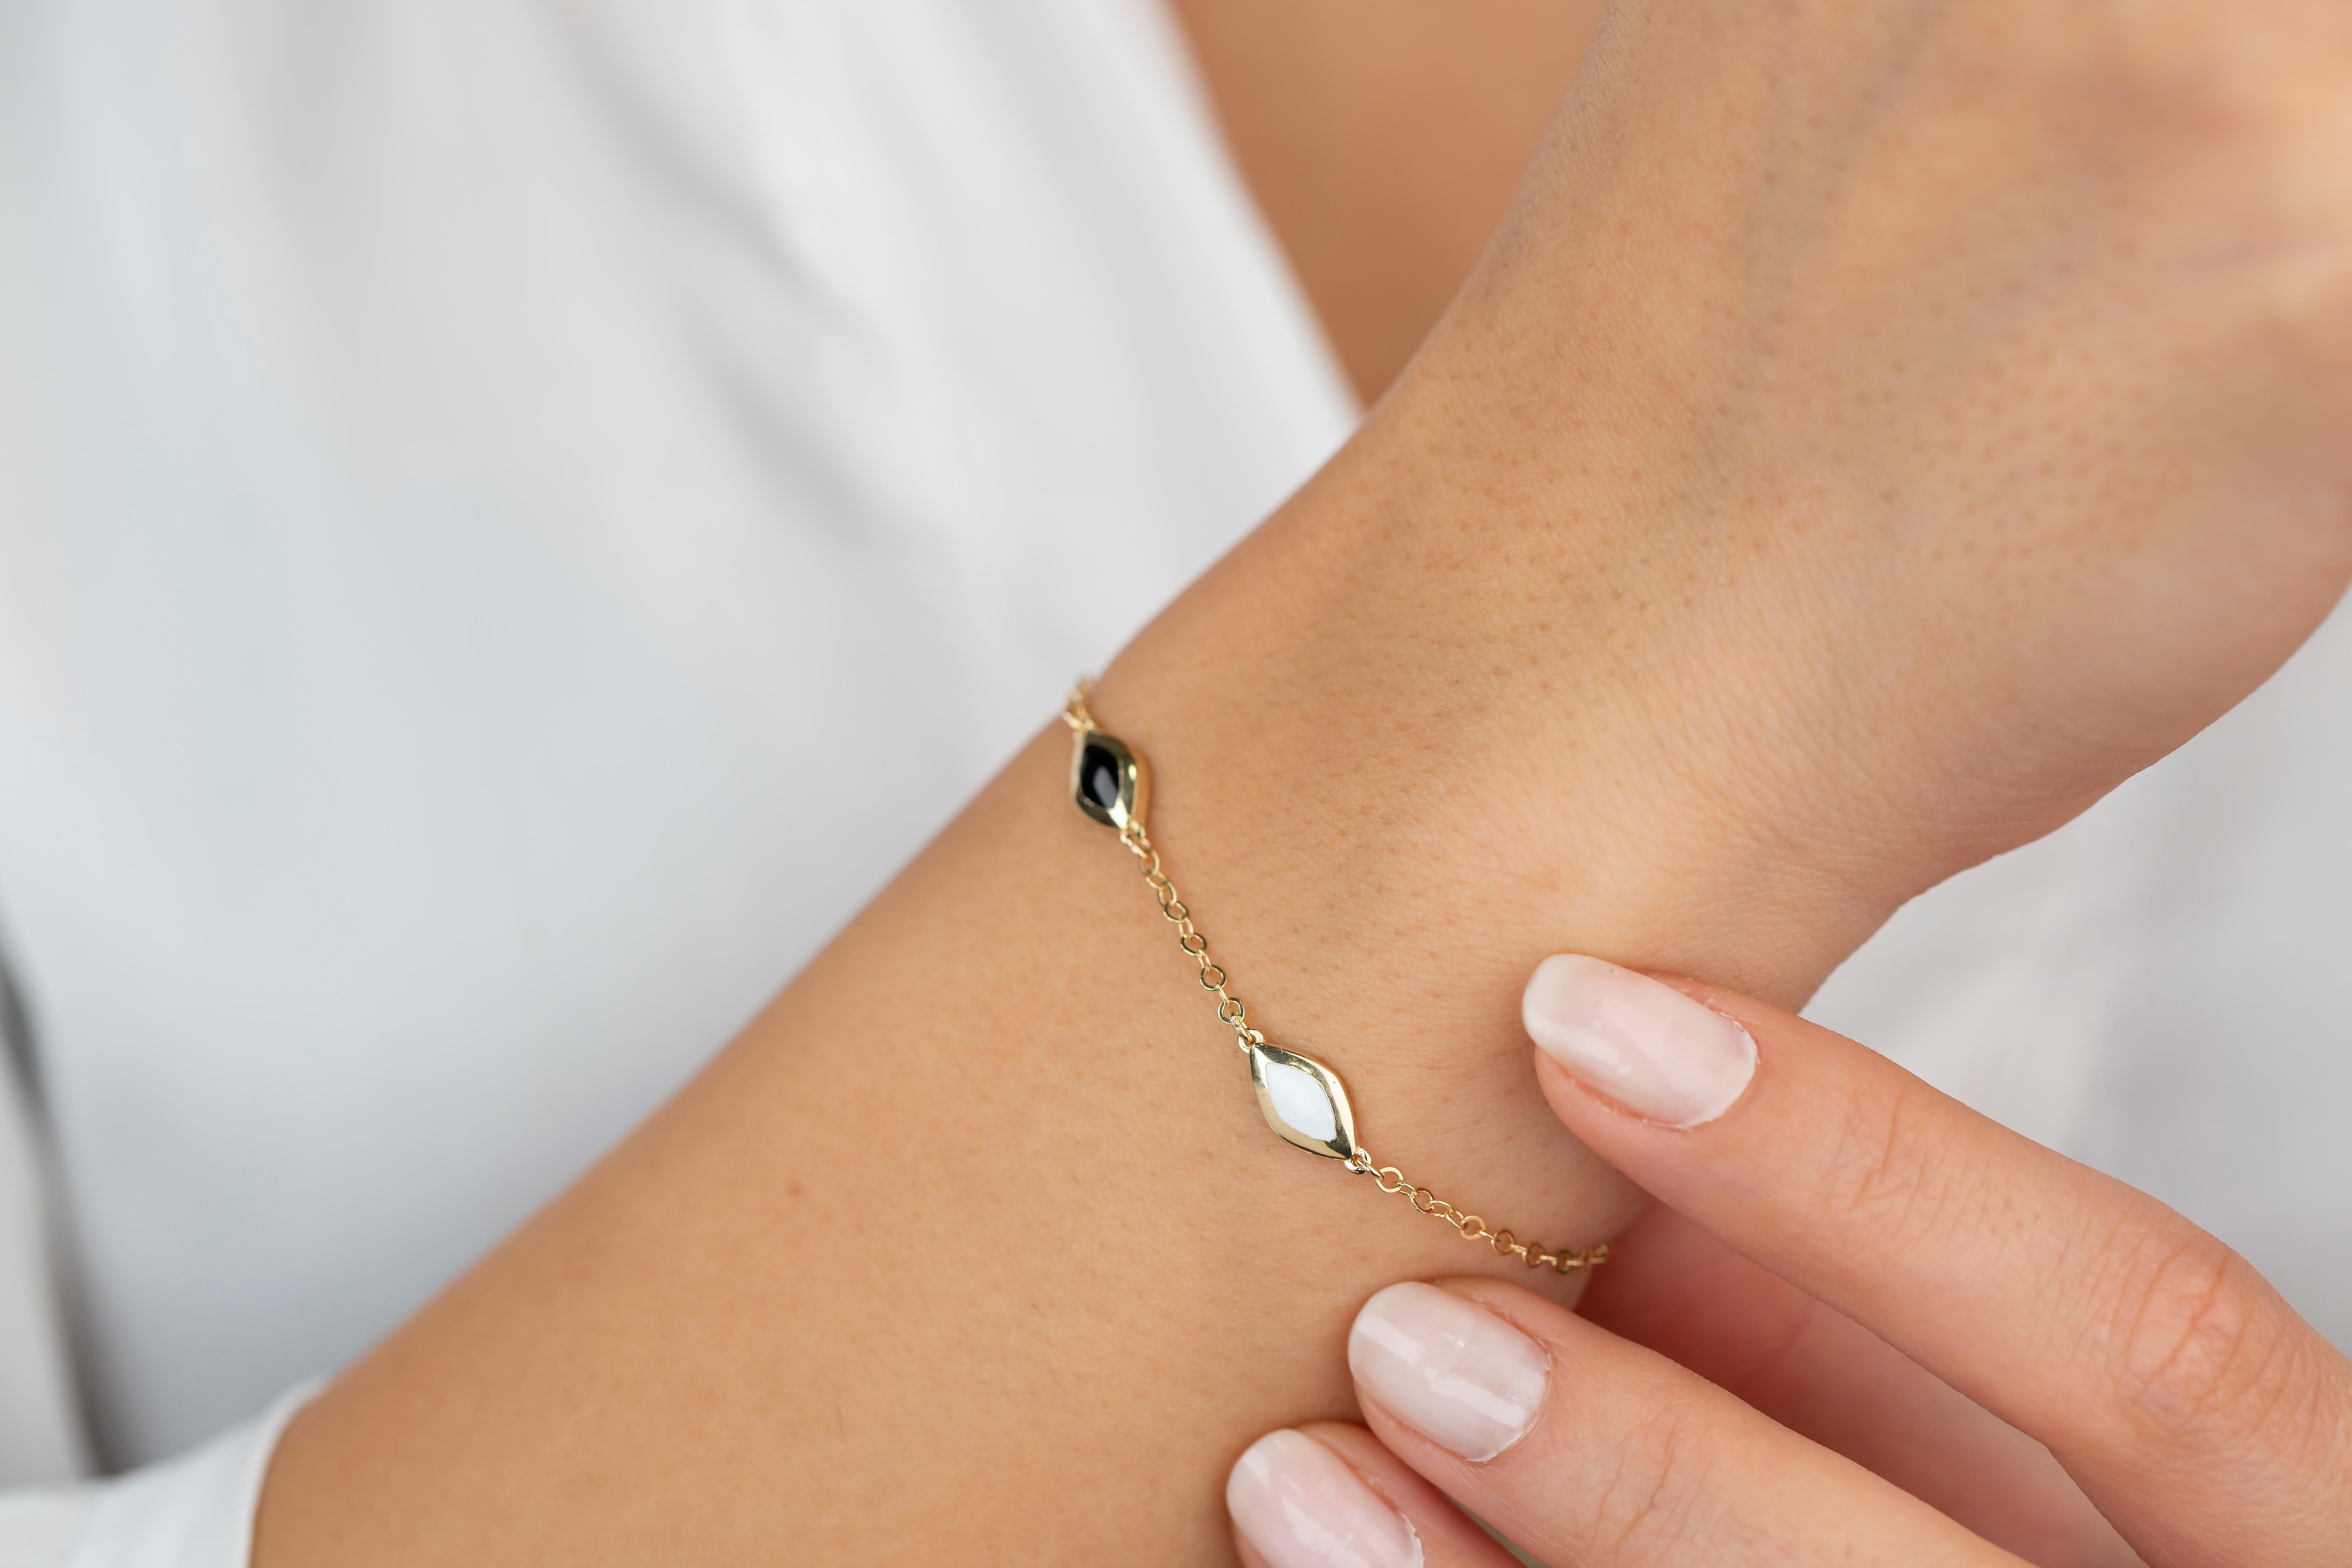 14K Gold Black and White Enameled Rhombus Dainty Bracelet

Made of 14 ct. solid gold.
With hallmark.

Total Weight: 1,64 gr.
Size: 18.5 cm

This piece was made with quality materials and excellent handwork. I guarantee the quality assurance of my